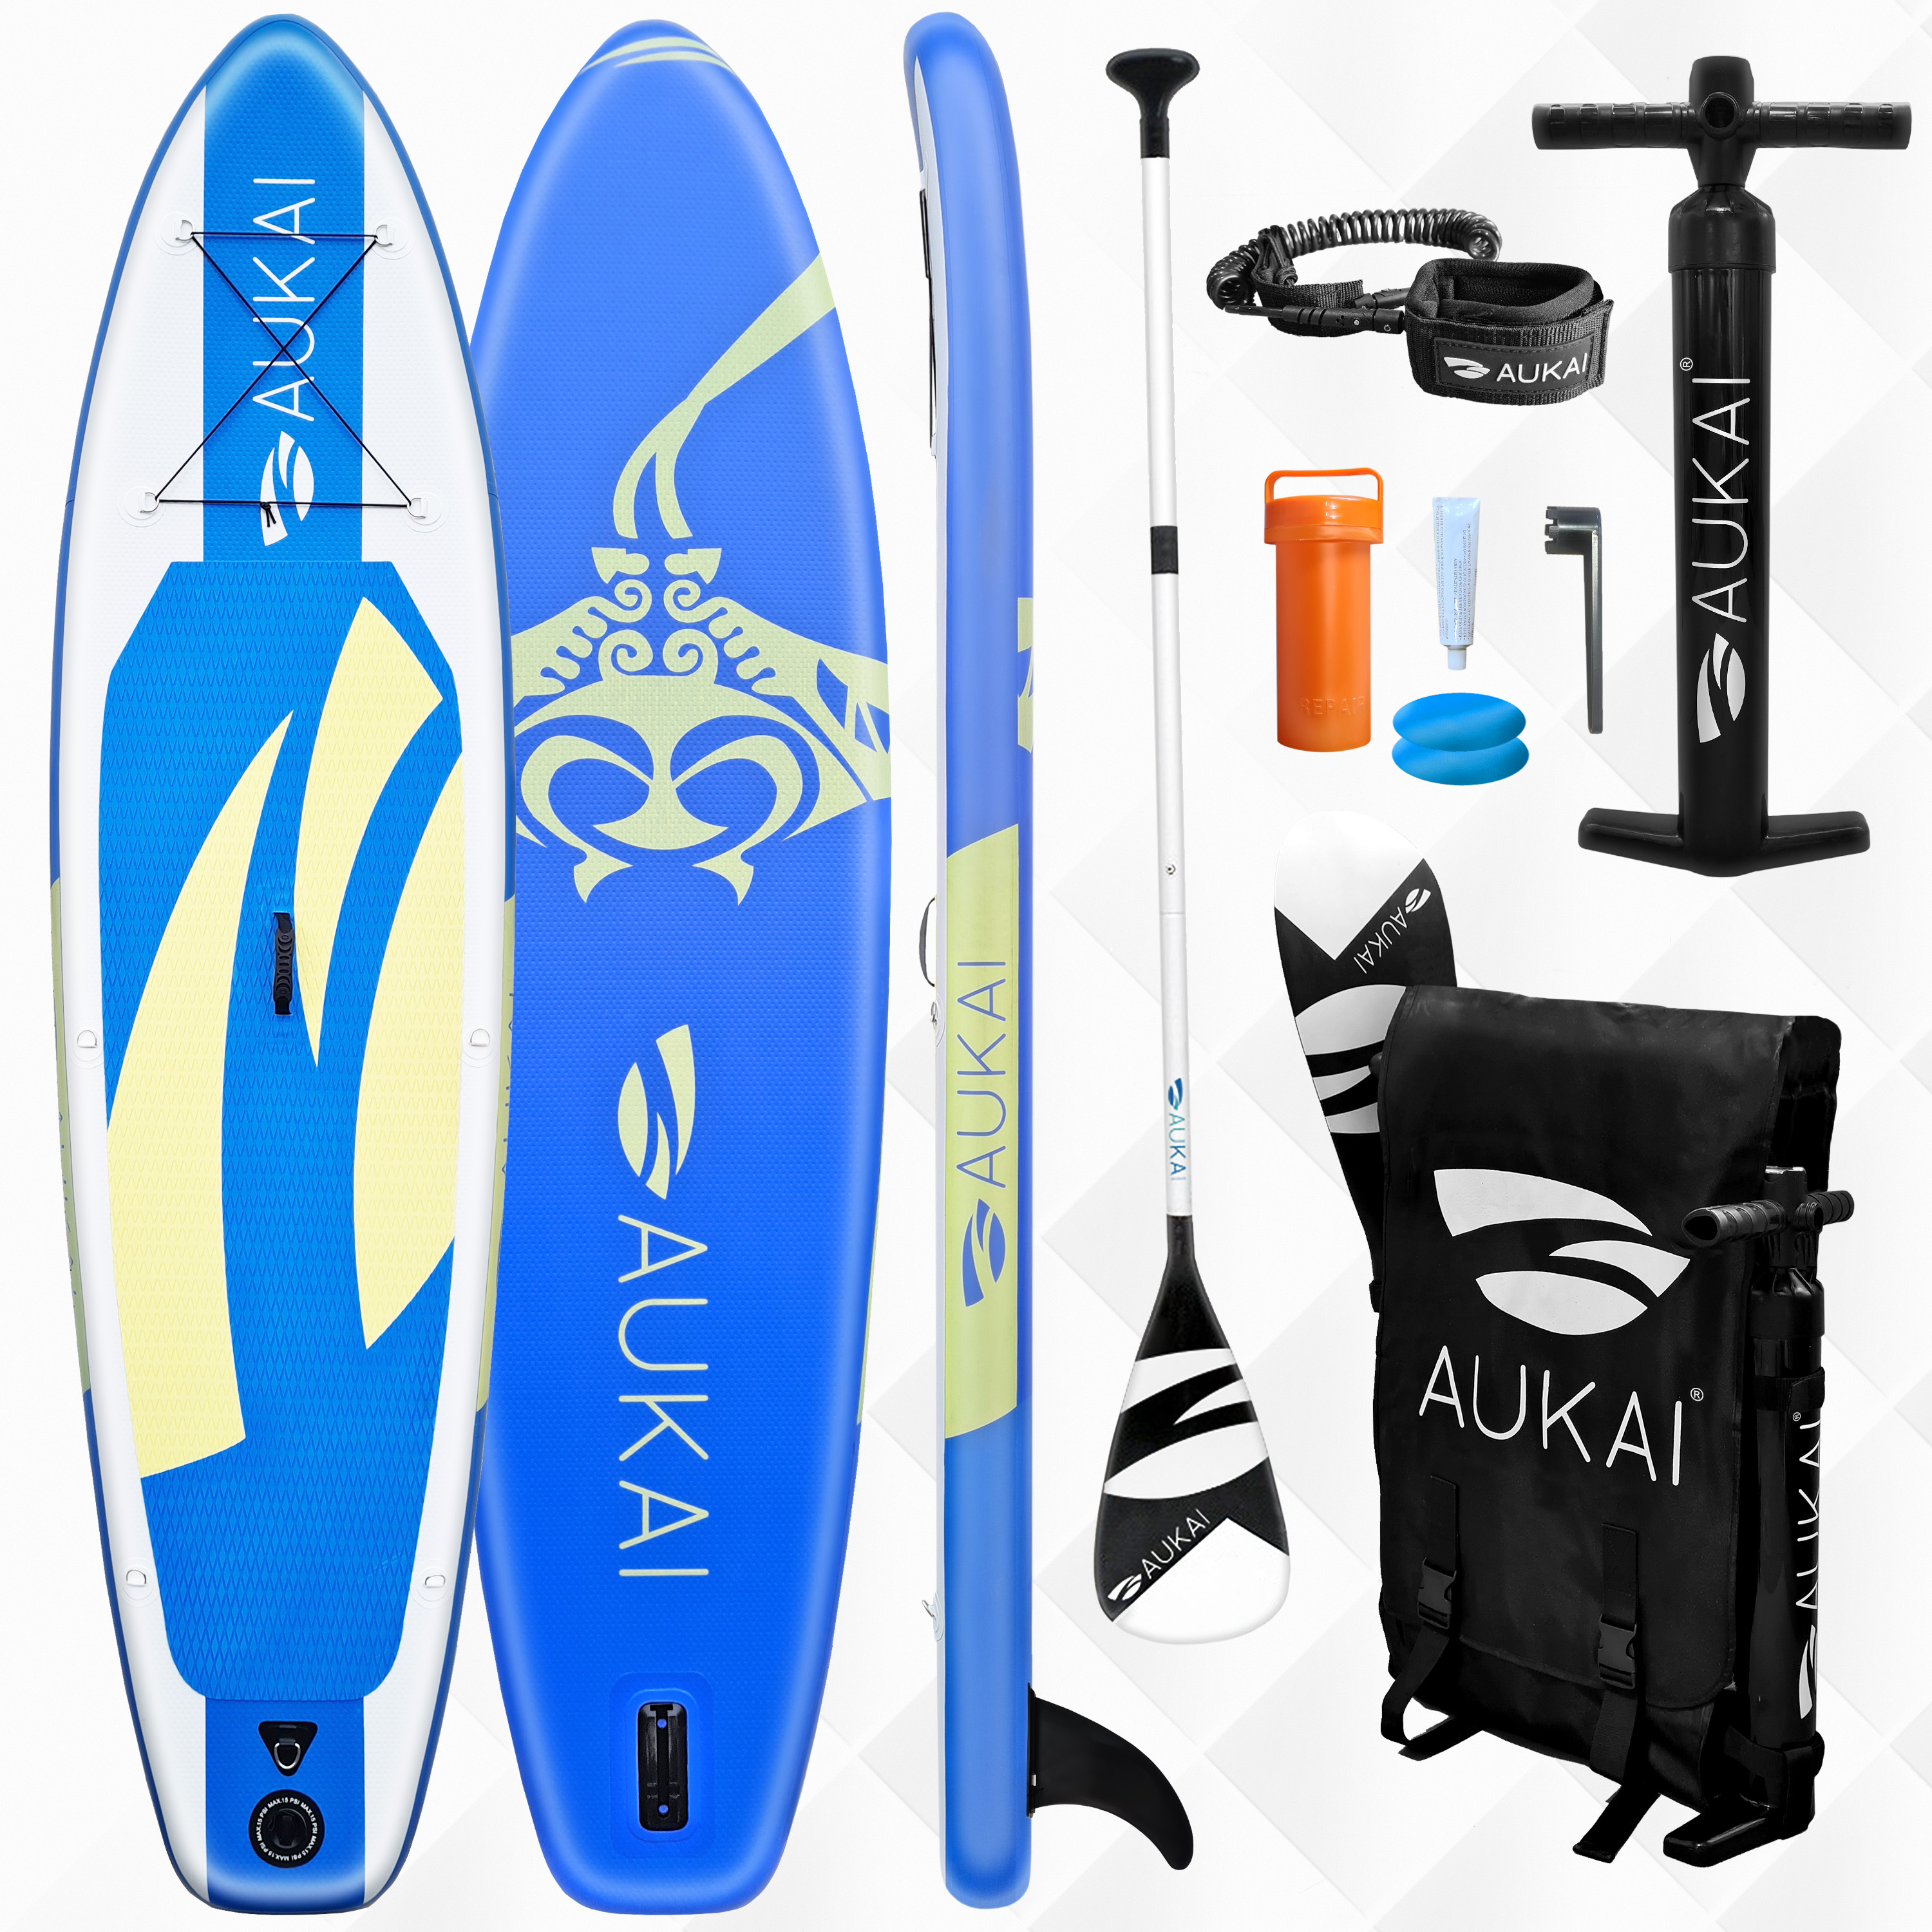 Stand Aukai® 320cm Up Paddle Board \